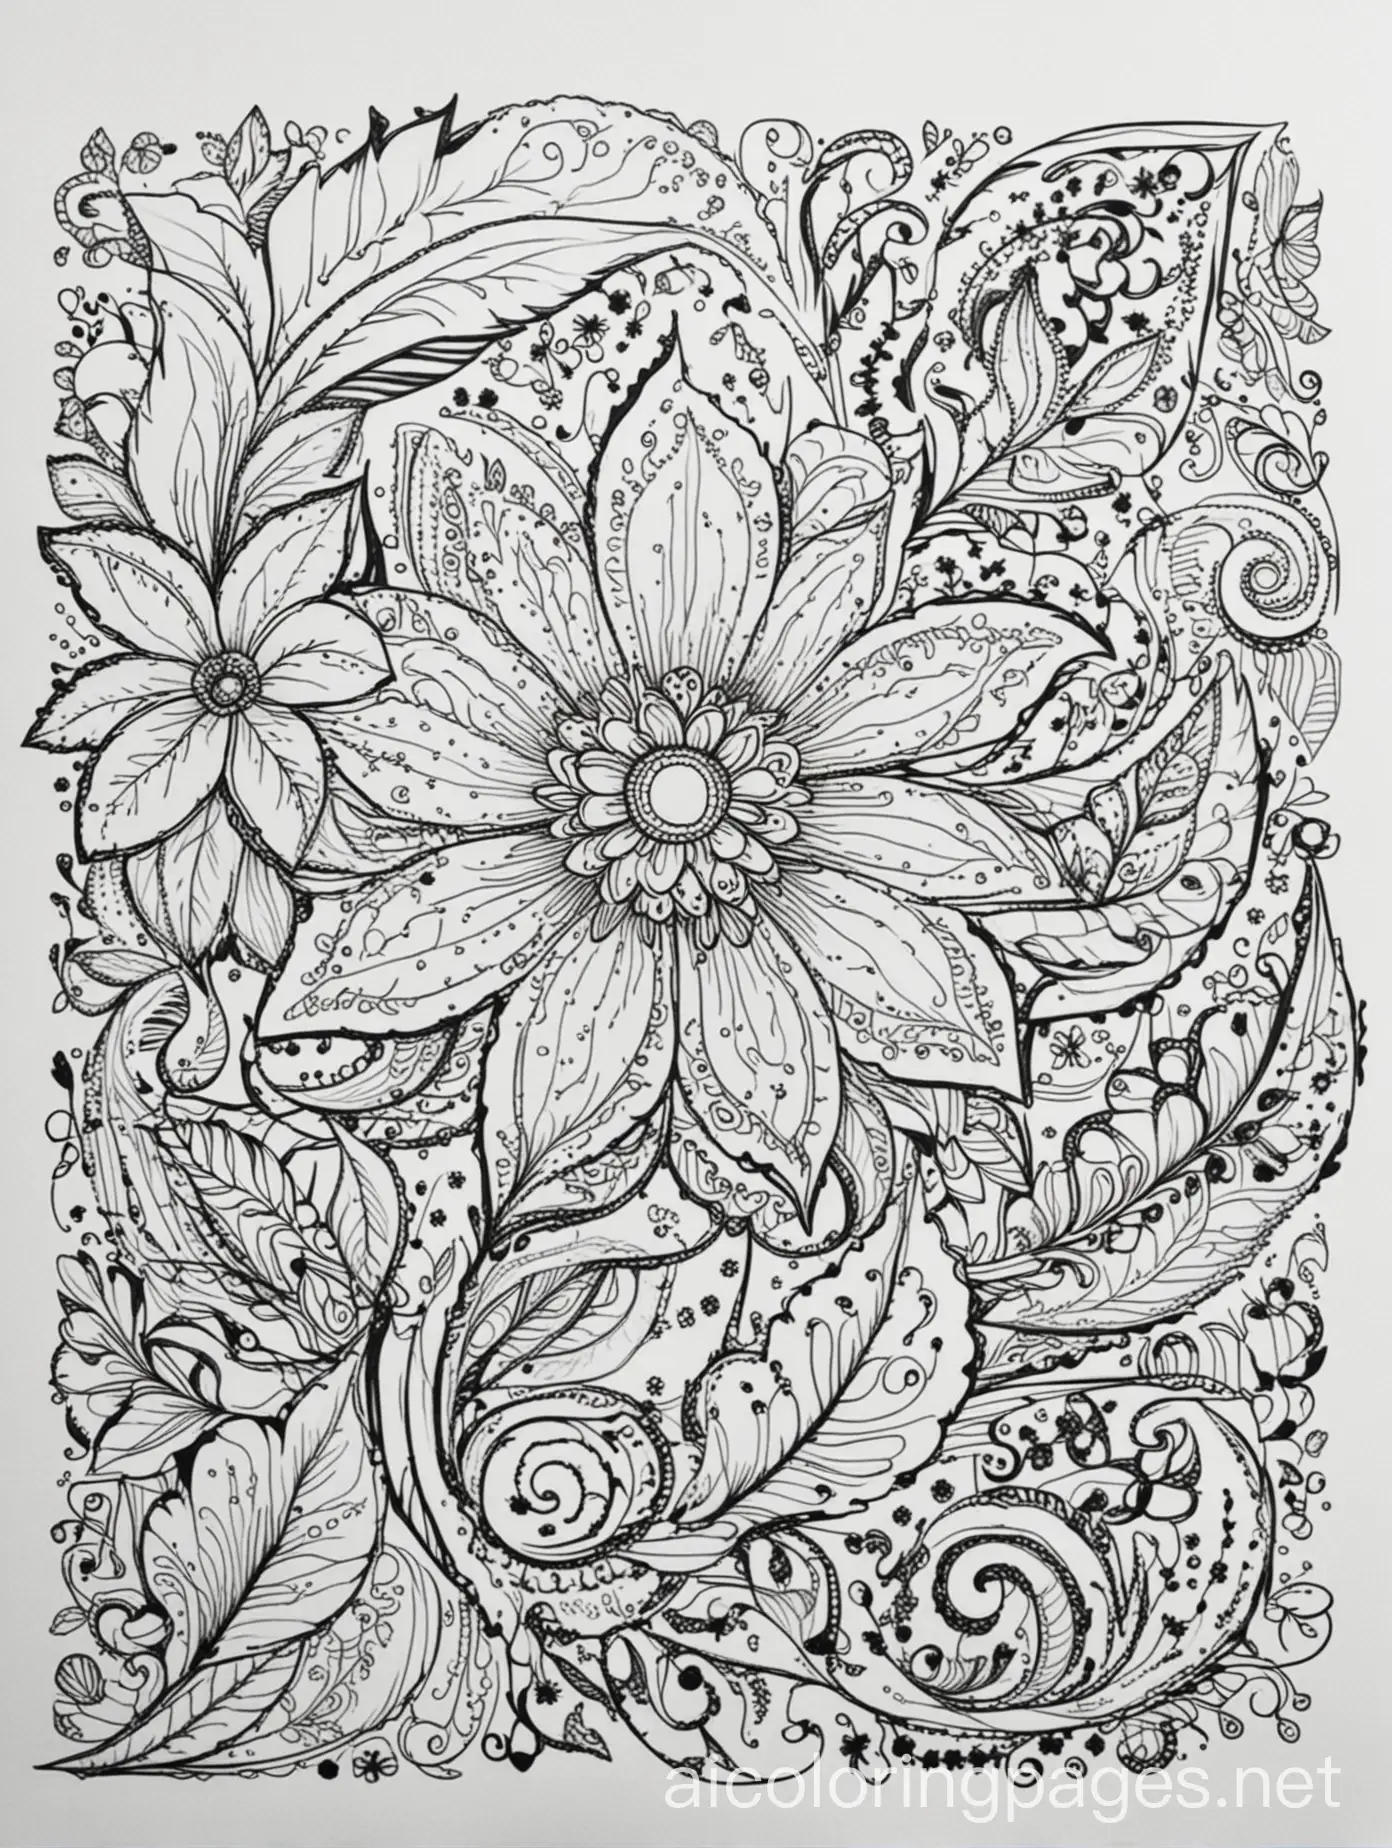 Coloring Page, black and white, line art, white background, Simplicity, Ample White Space. The background of the coloring page is plain white to make it easy for young children to color within the lines. The outlines of the paisley shapes and floral designs are easy to distinguish, making it simple for kids to color without too much difficulty.  less detailed just simple flower shapes for a coloring book
, Coloring Page, black and white, line art, white background, Simplicity, Ample White Space. The background of the coloring page is plain white to make it easy for young children to color within the lines. The outlines of all the subjects are easy to distinguish, making it simple for kids to color without too much difficulty